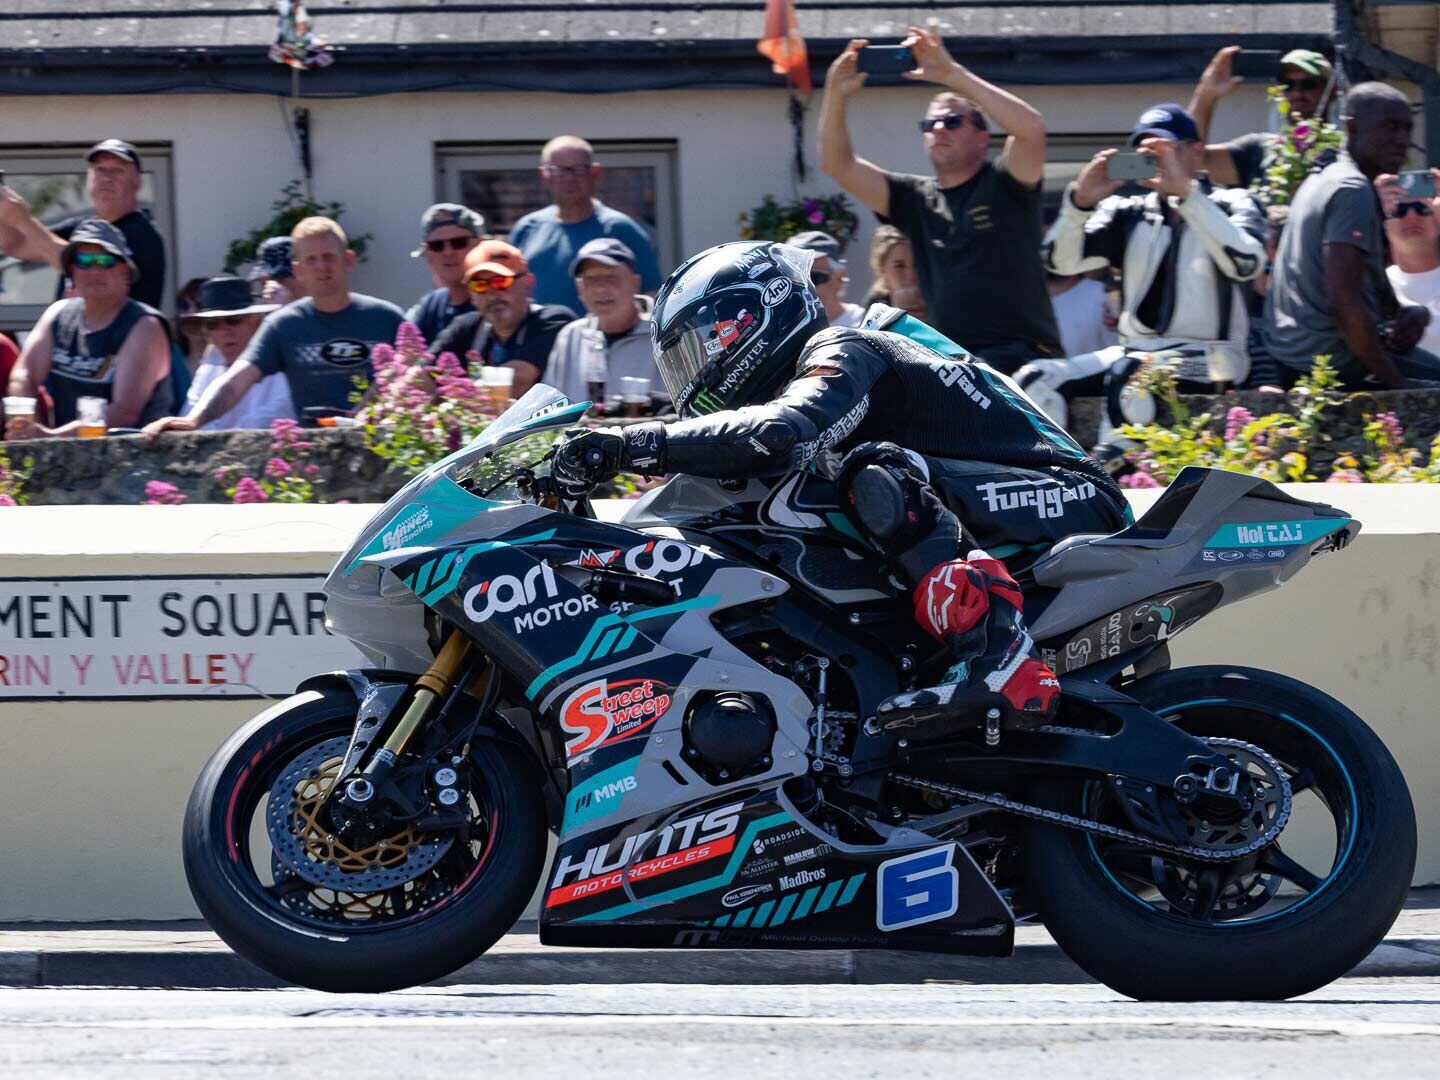 Aboard his MD Racing Yamaha YZF-R6 BN6, Dunlop won both Supersport events. In the second race, he set a new course record of 130.4 mph finishing nine seconds ahead of Peter Hickman.